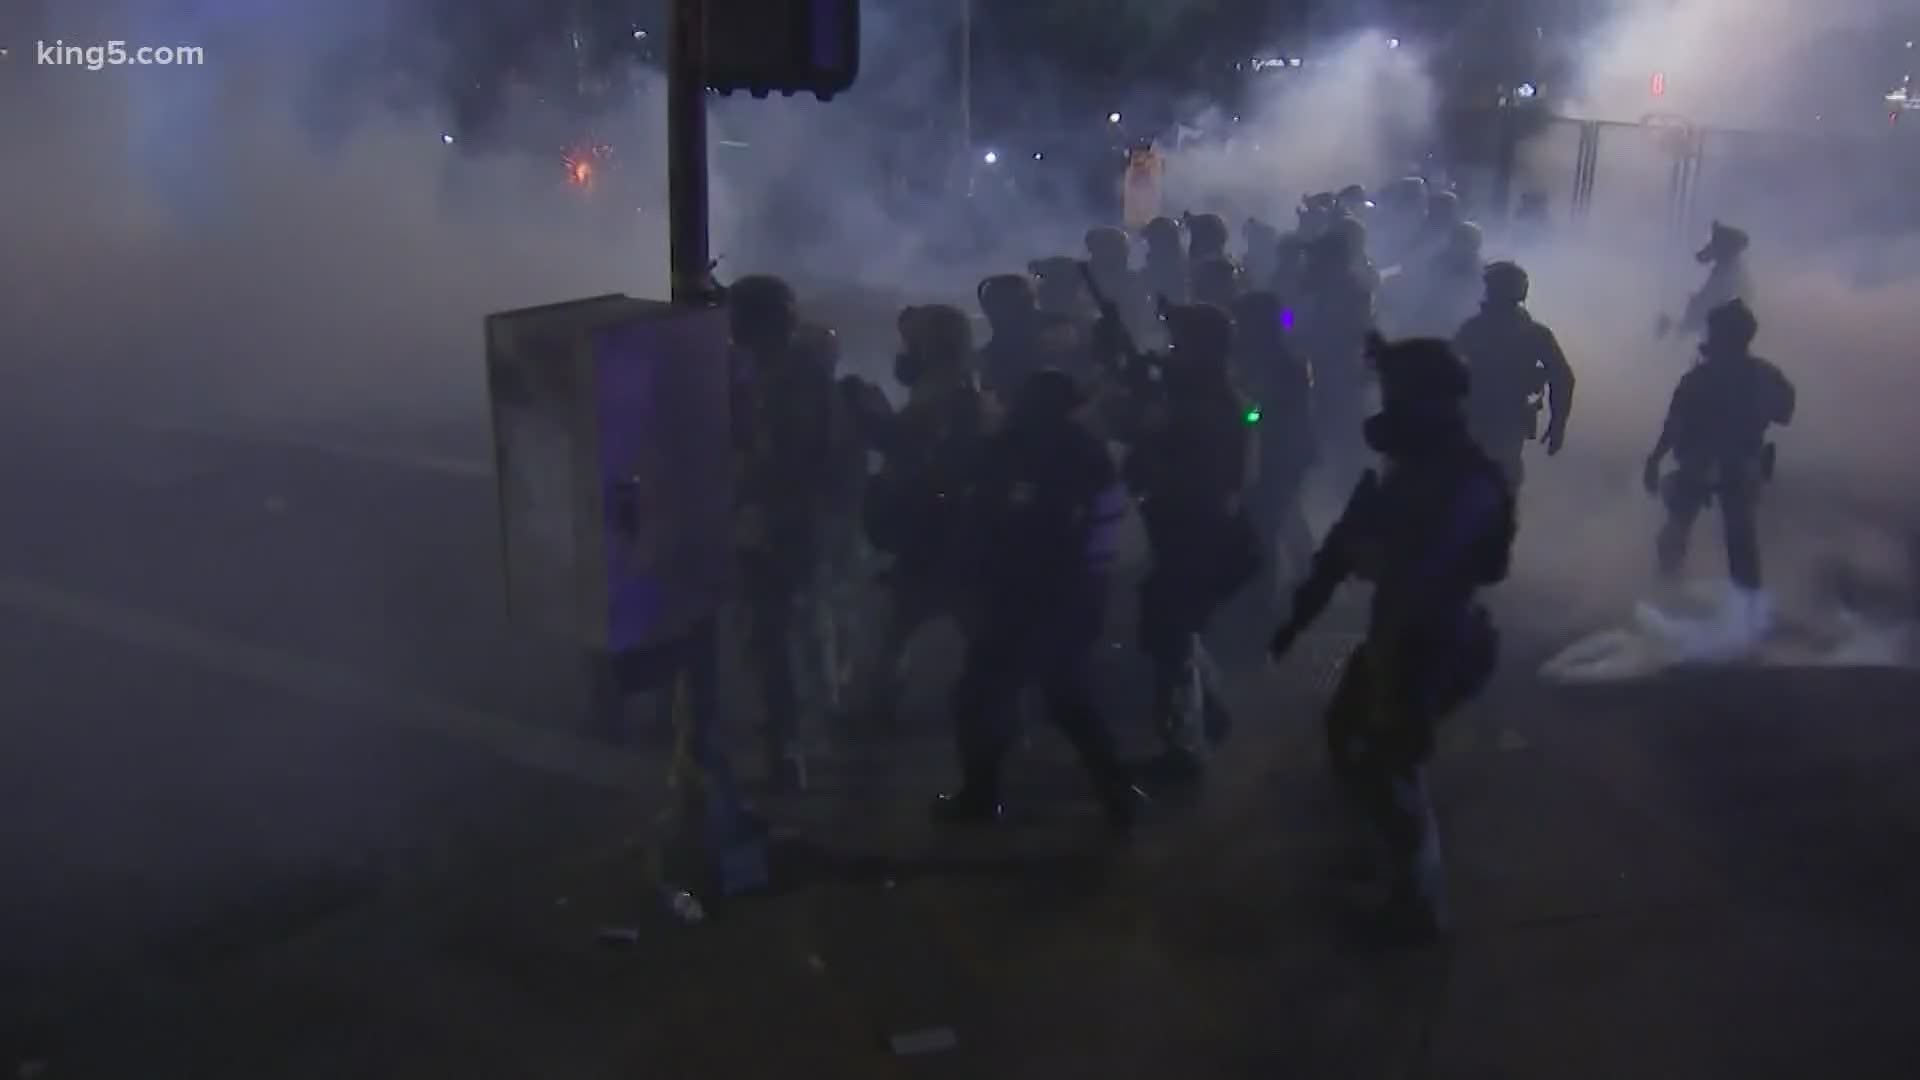 The federal government filed a temporary restraining order against Seattle's ban on police use of tear gas and other crowd control measures.